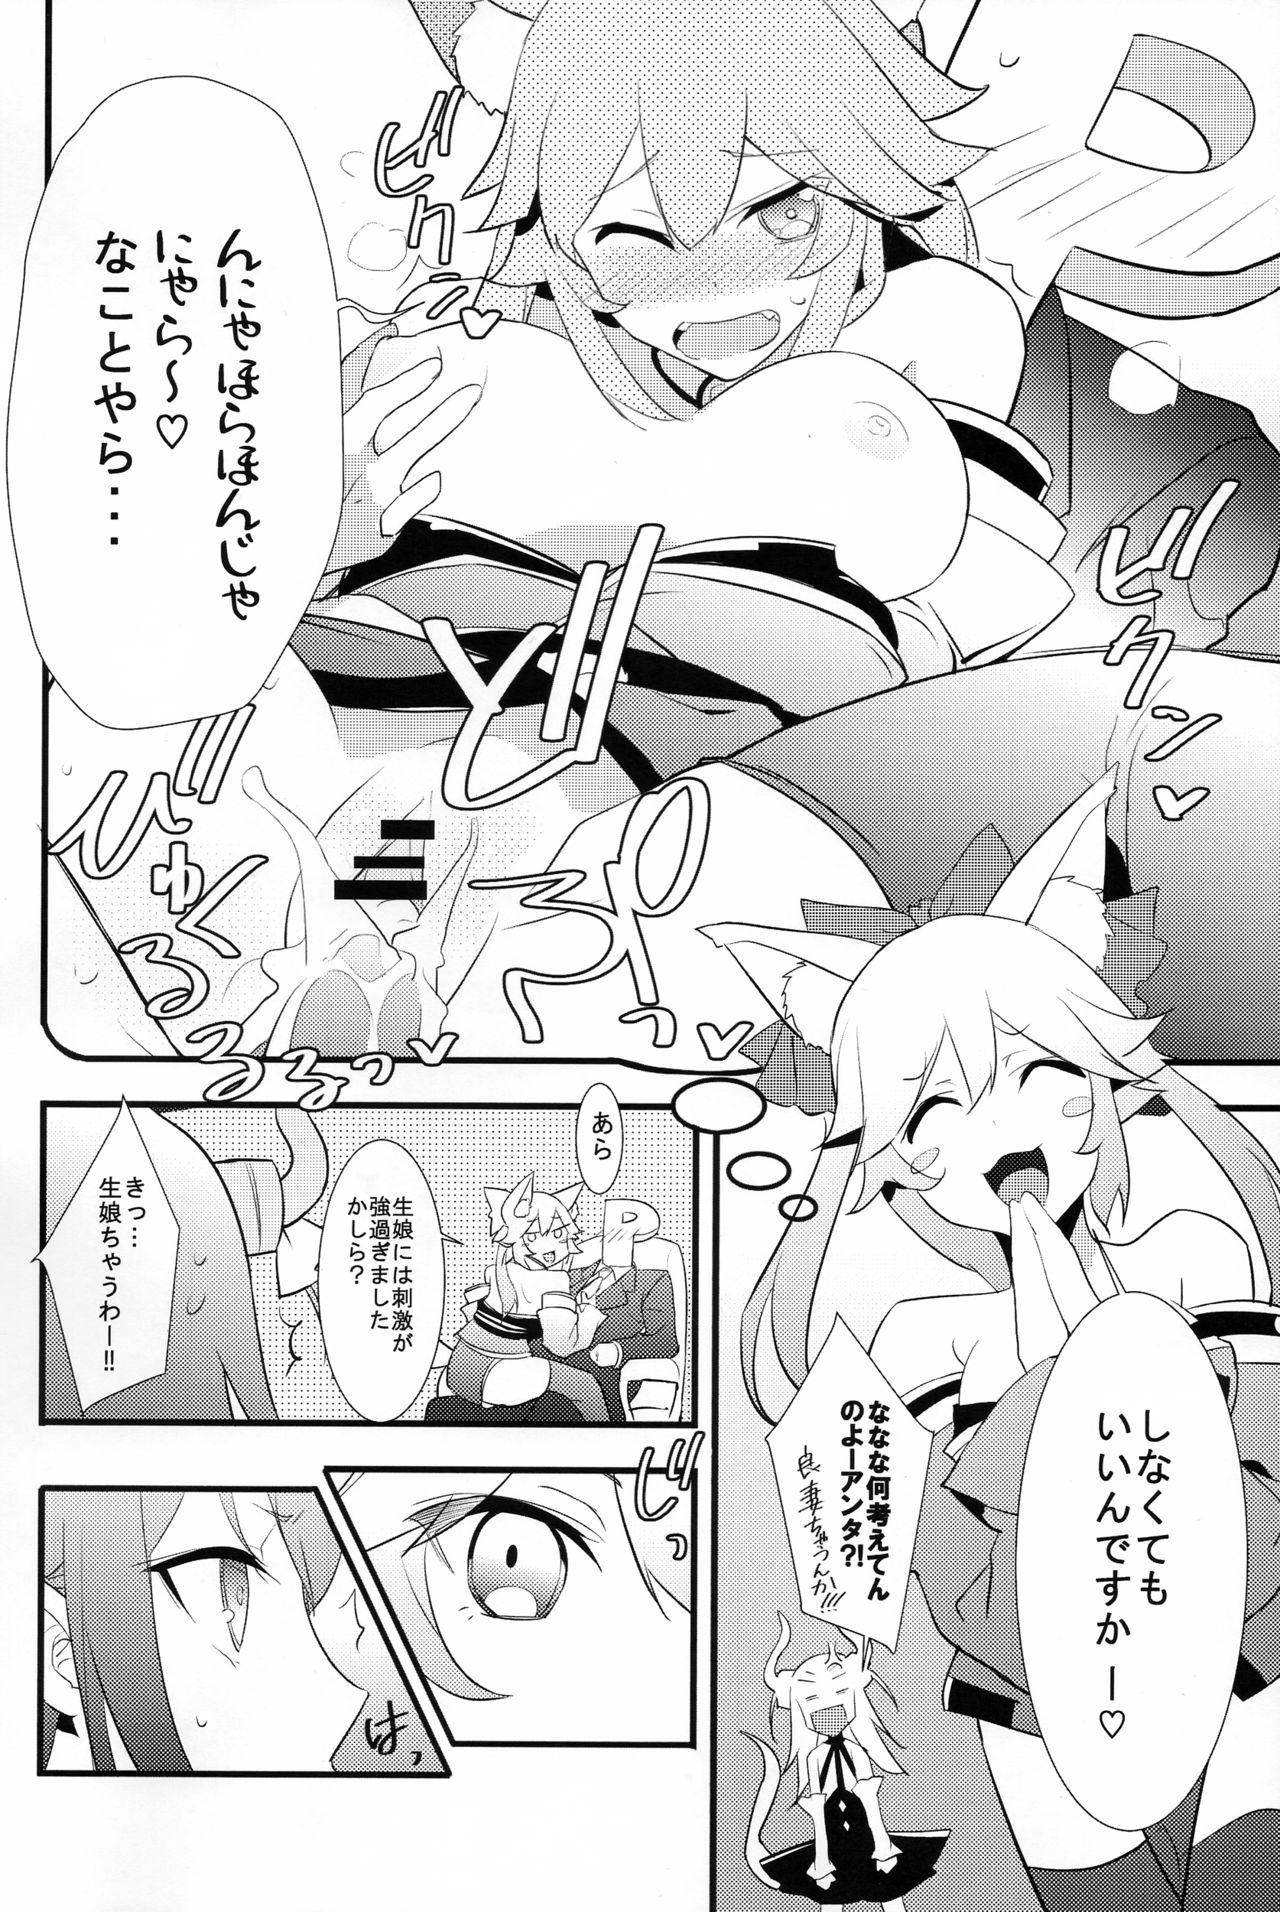 Freeteenporn The IDOL SERVANT - The idolmaster Fate grand order Monster hunter Fate extra Pica - Page 7